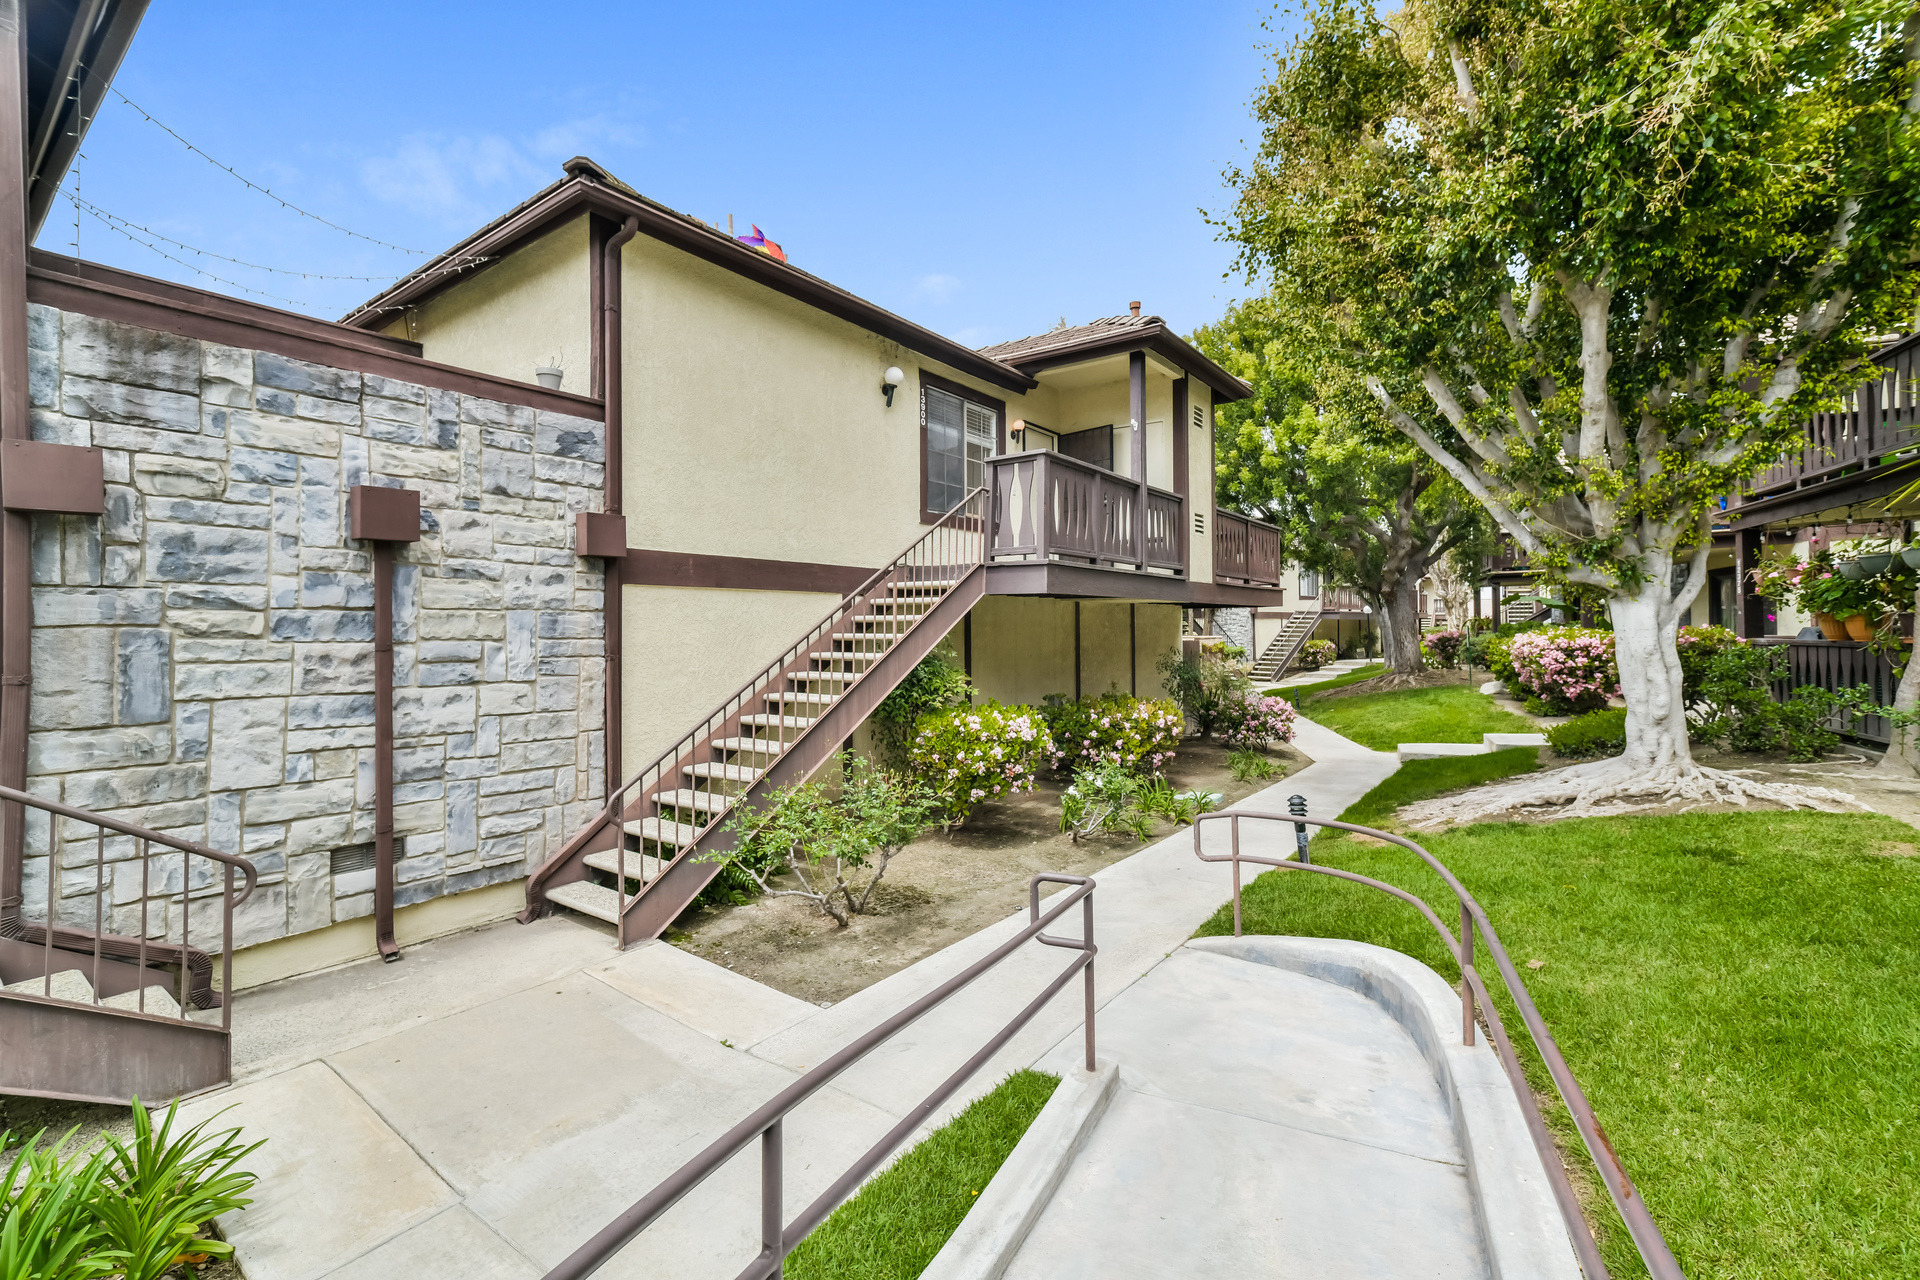 Beautiful North Tustin, CA house showcasing the best property management services